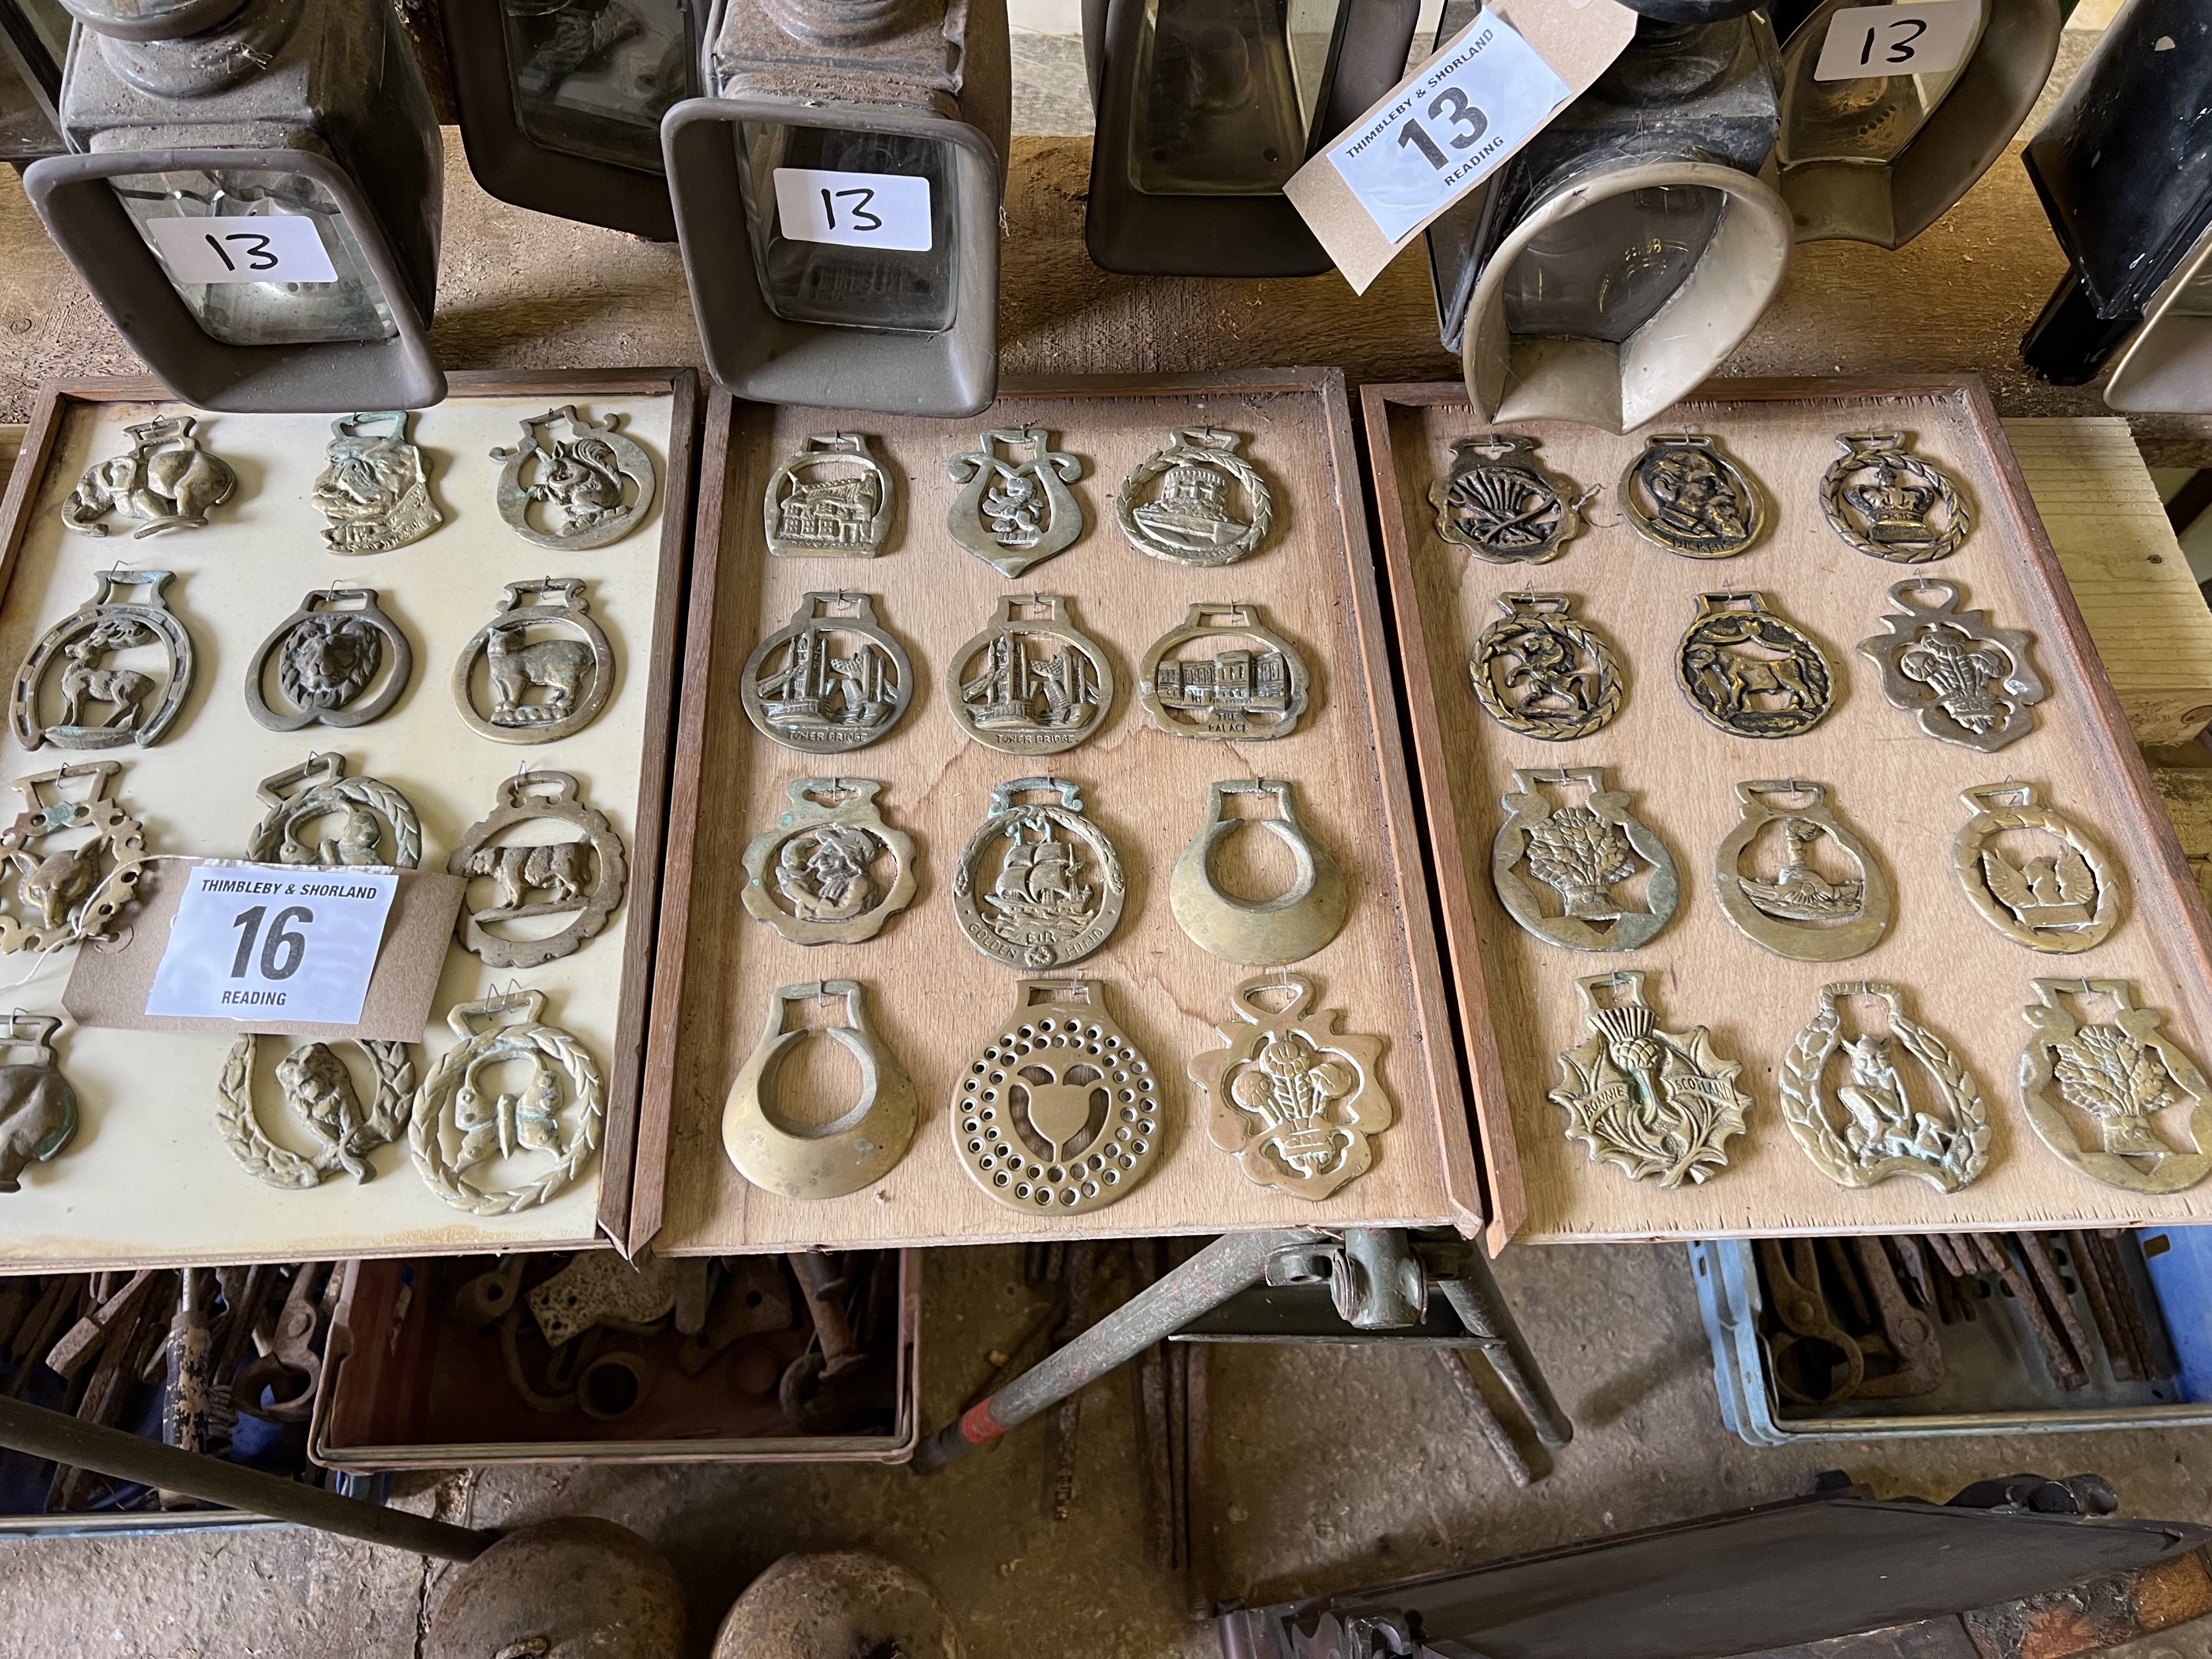 64 horse brasses mounted on wooden boards - Image 2 of 7